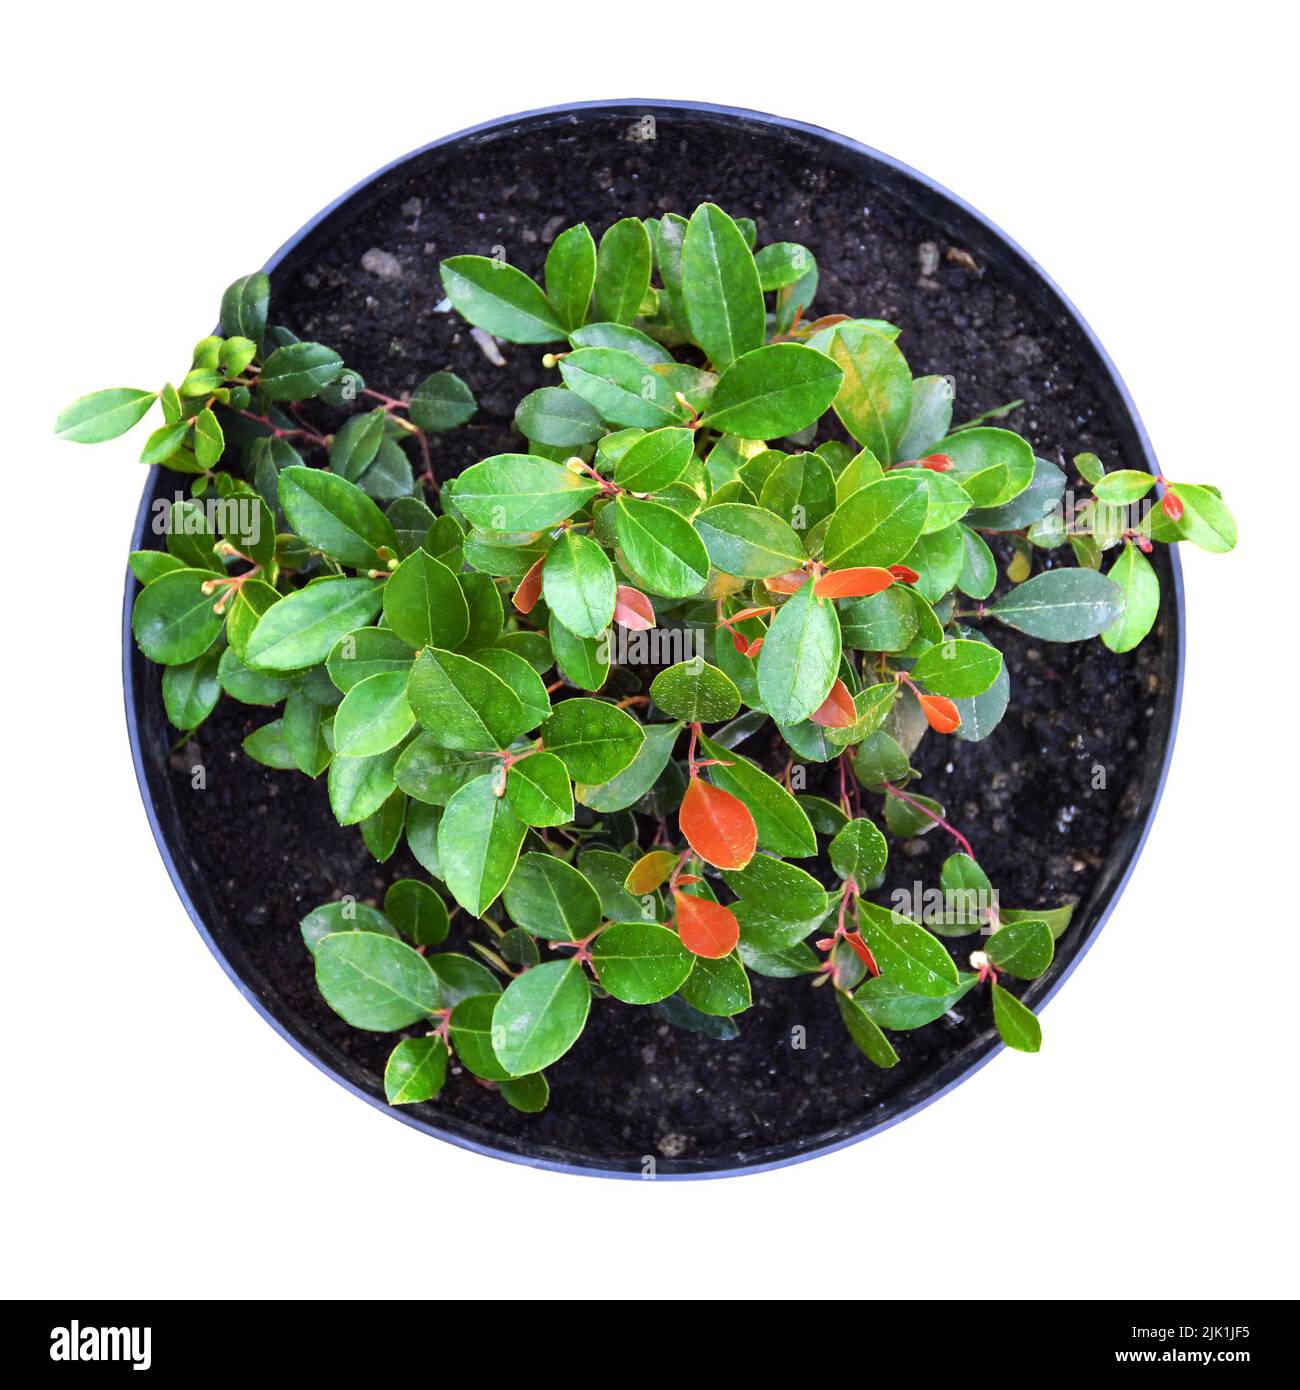 Gaultheria plant in pot isolated on white background Stock Photo